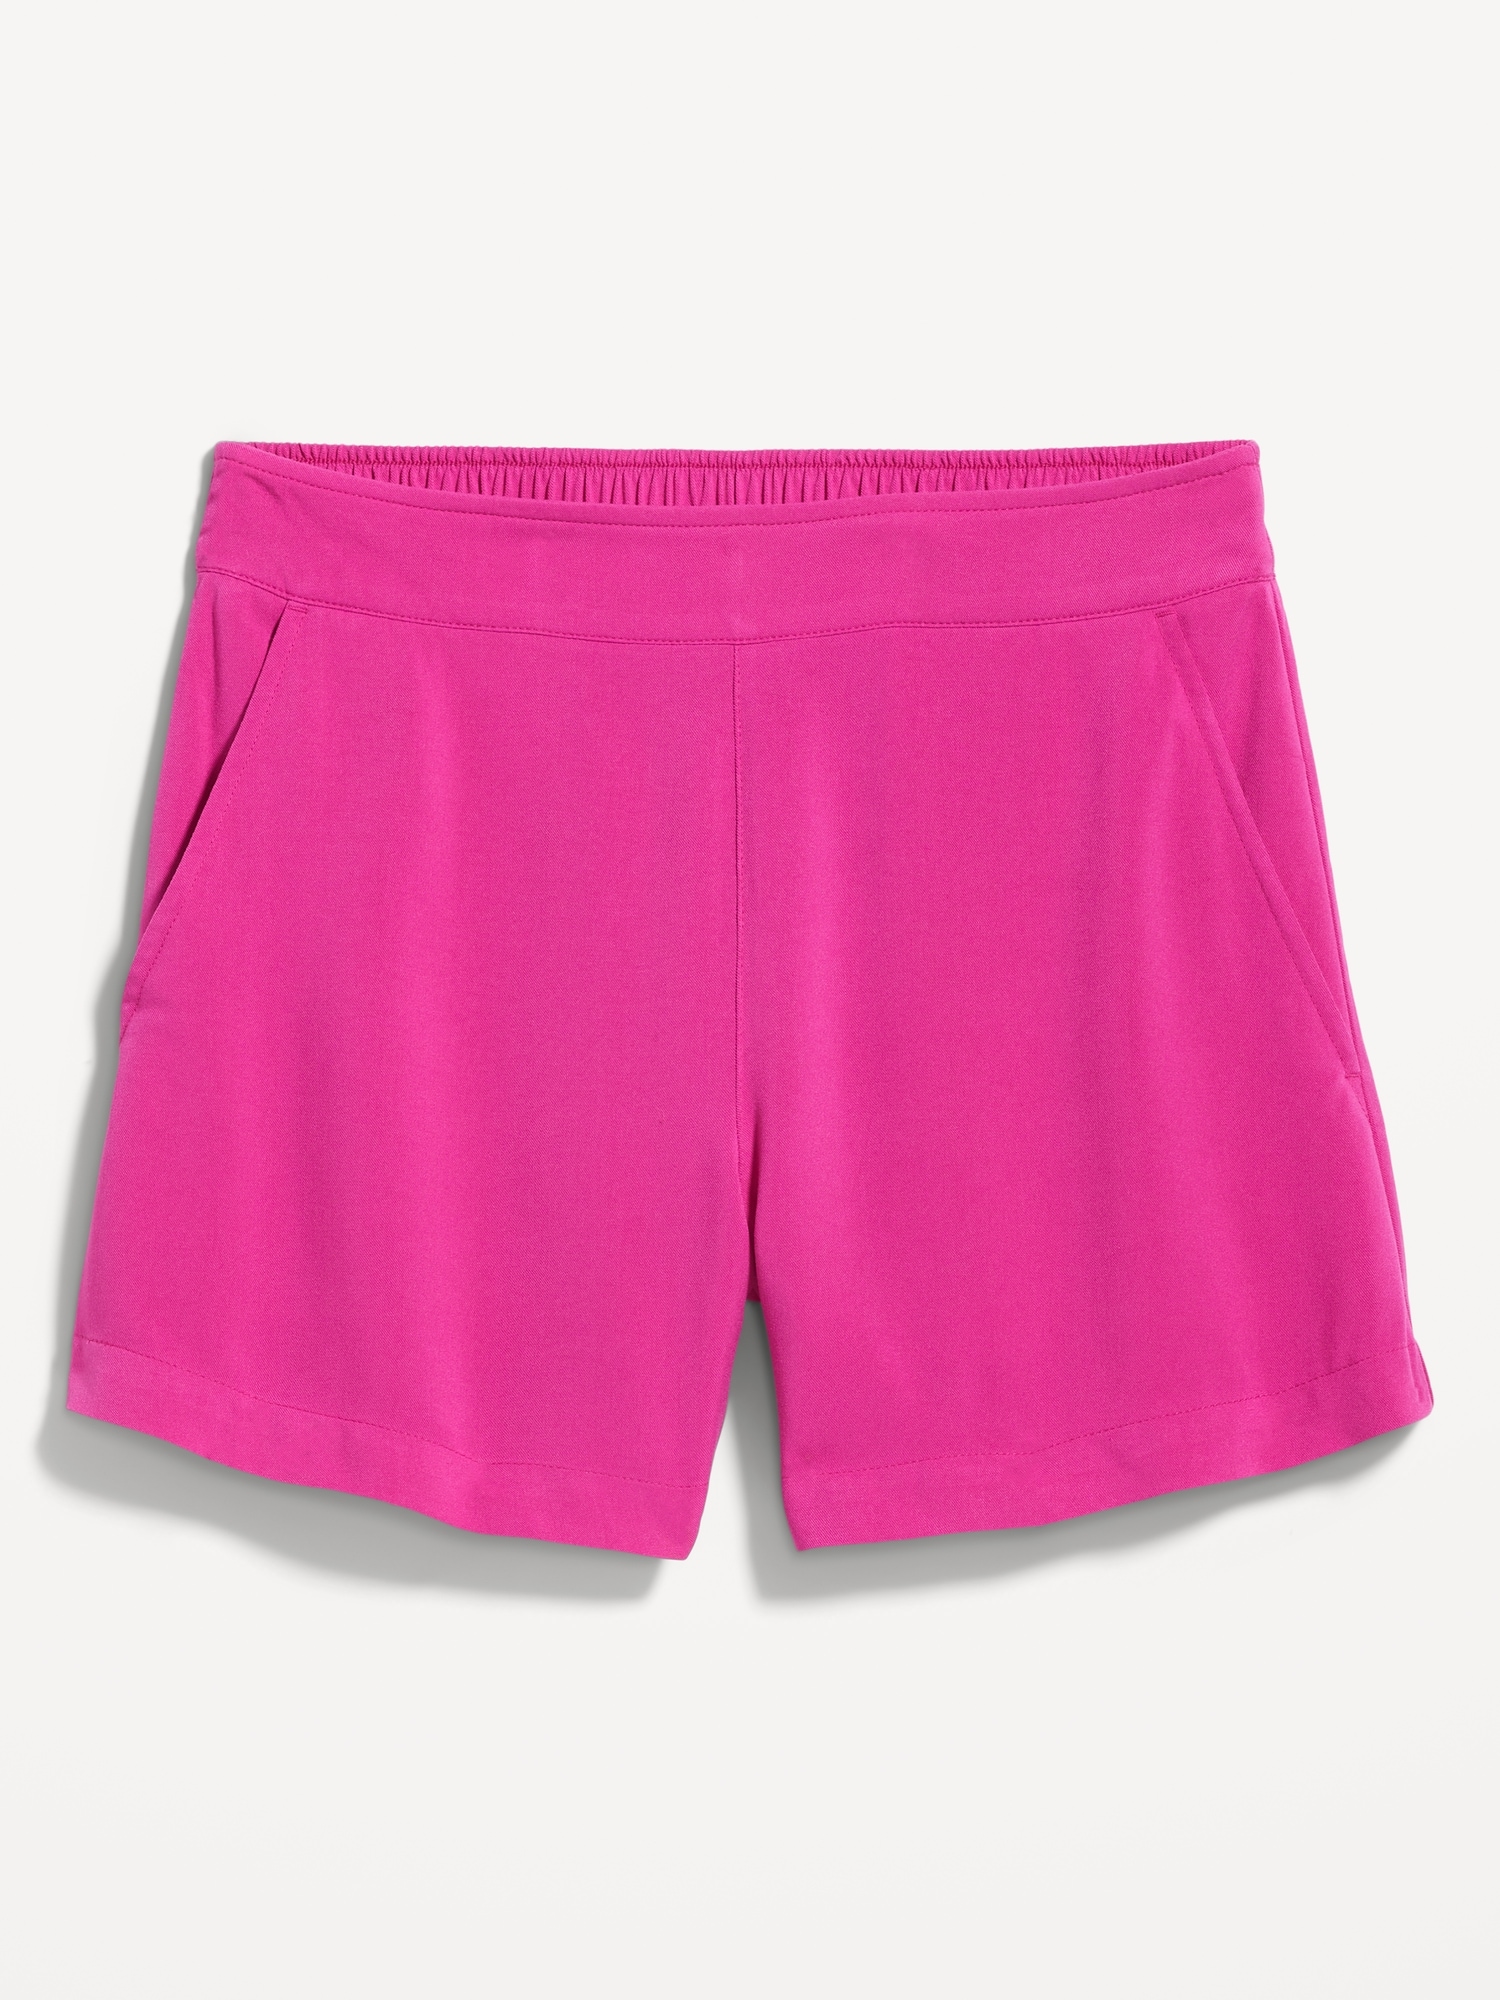 High-Waisted Playa Soft-Spun Shorts for Women -- 4-inch inseam | Old Navy